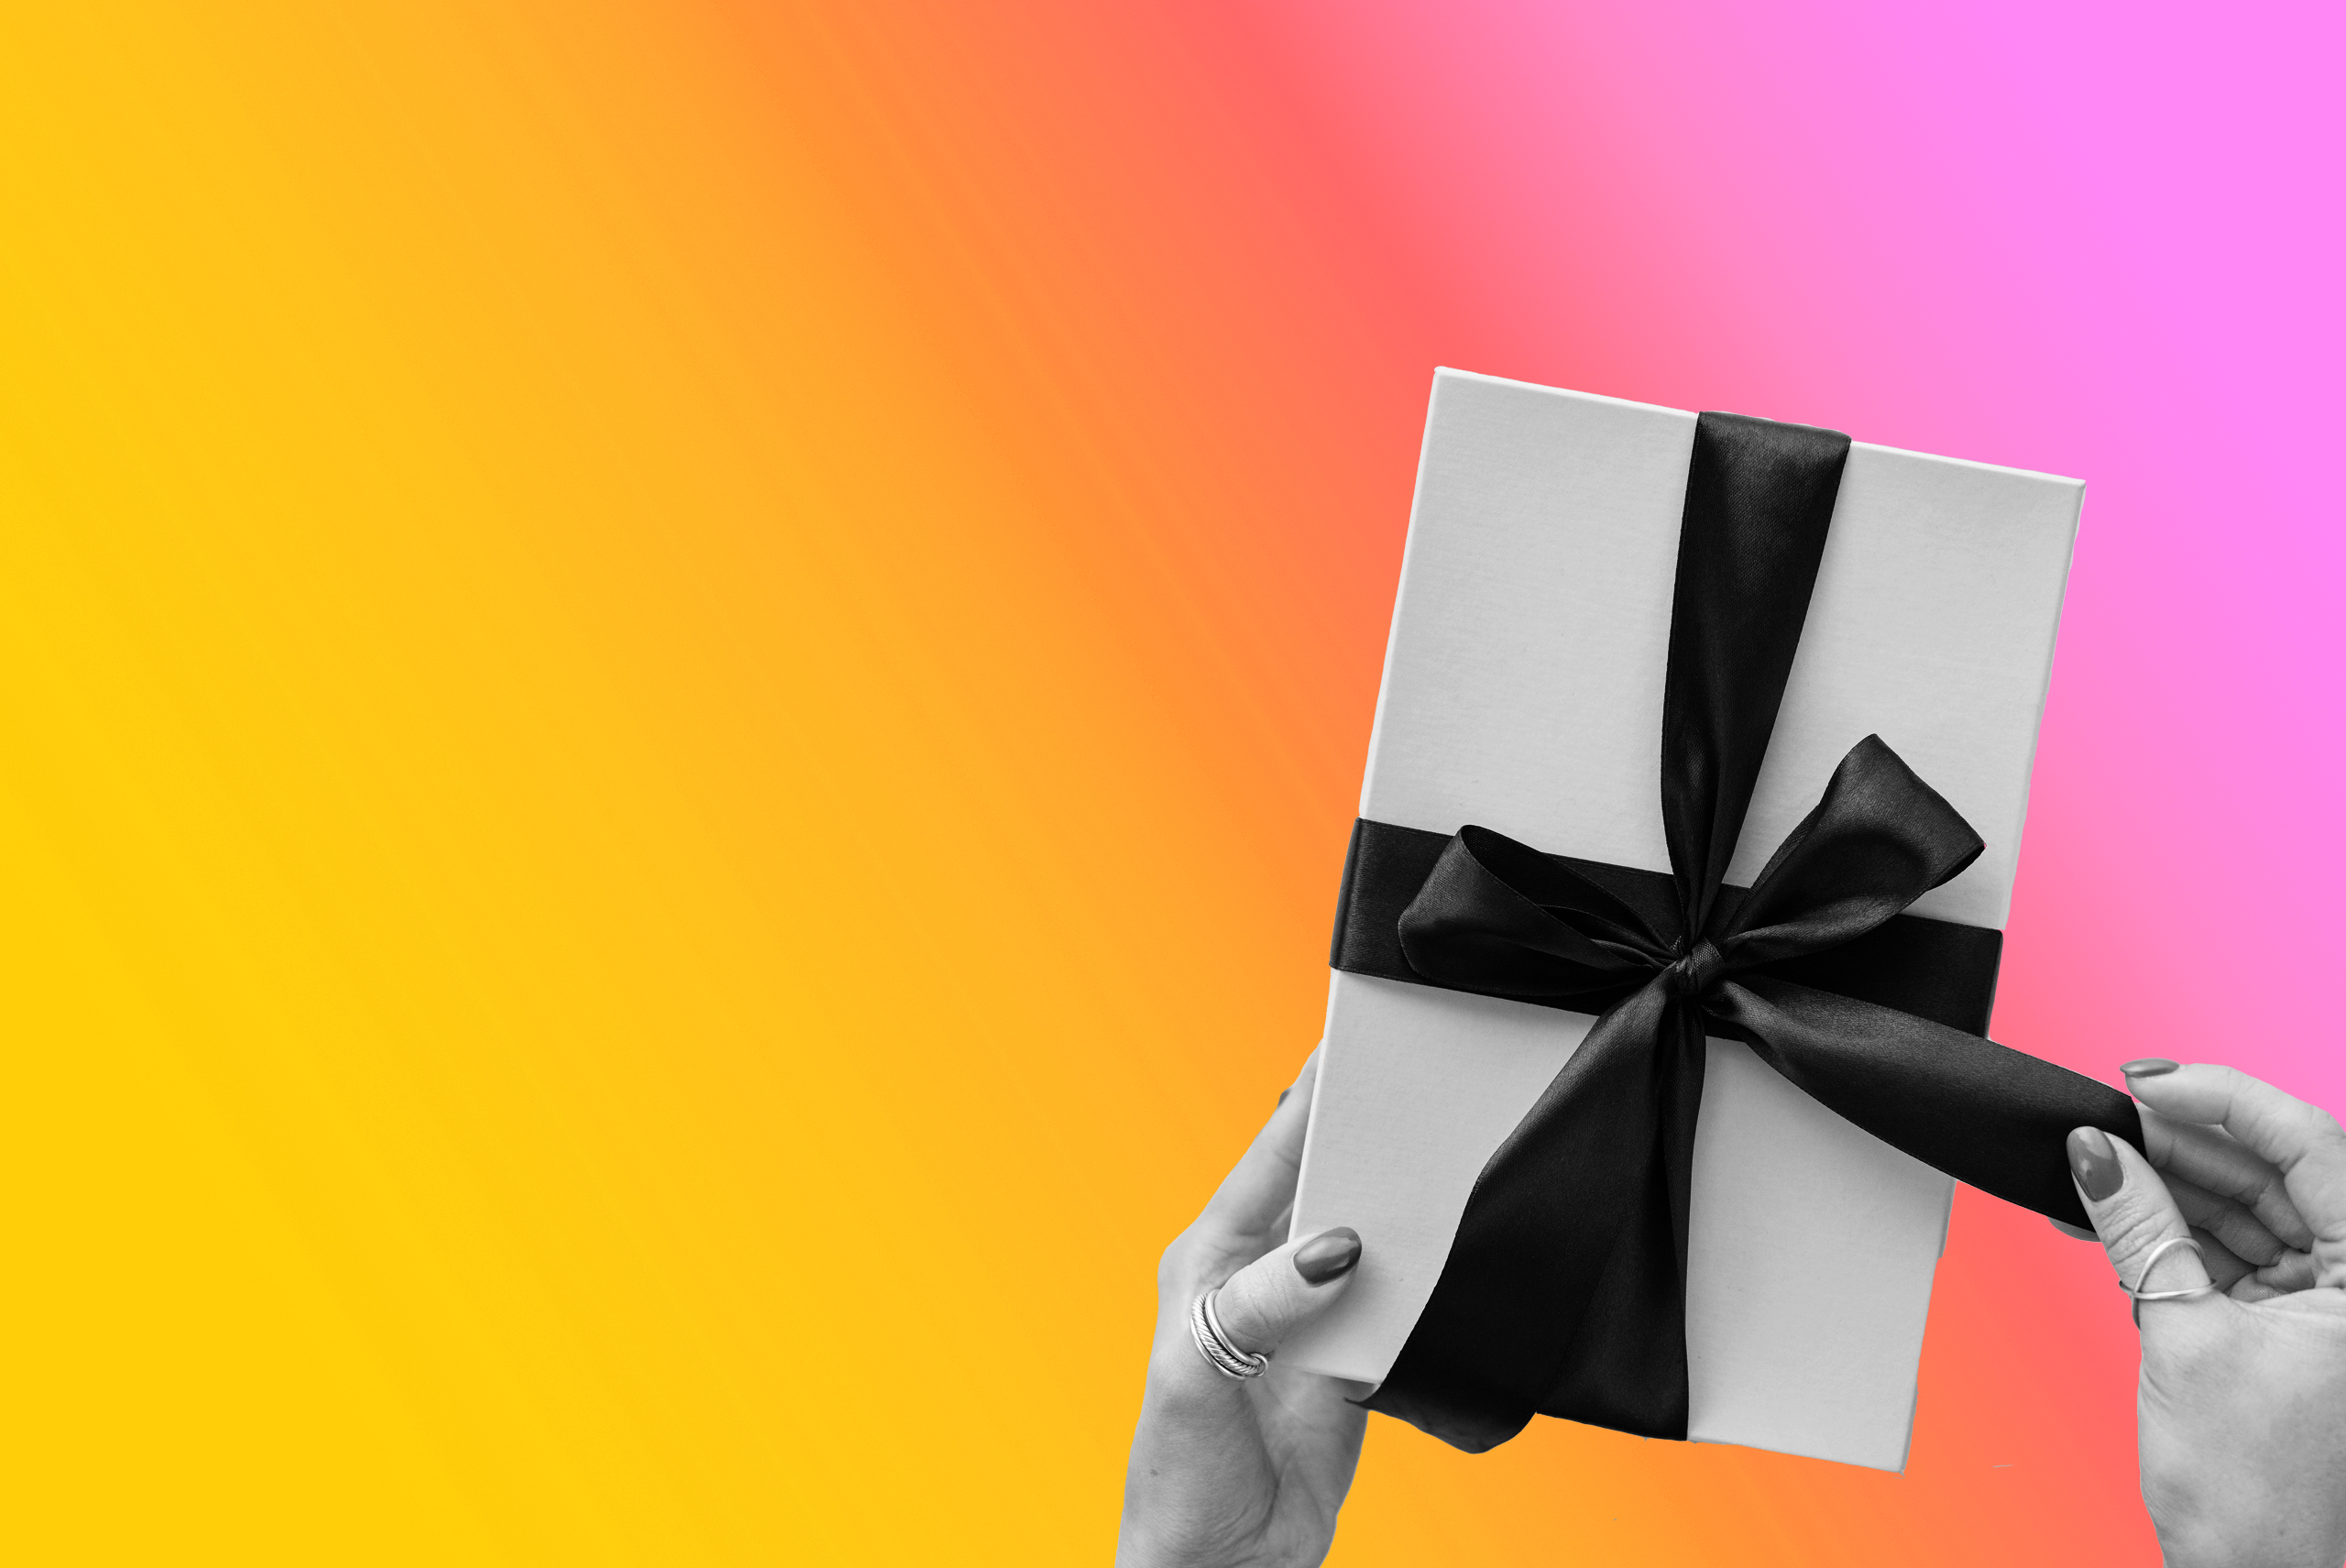 15 Corporate Gift Ideas To Impress Your Clients & Employees